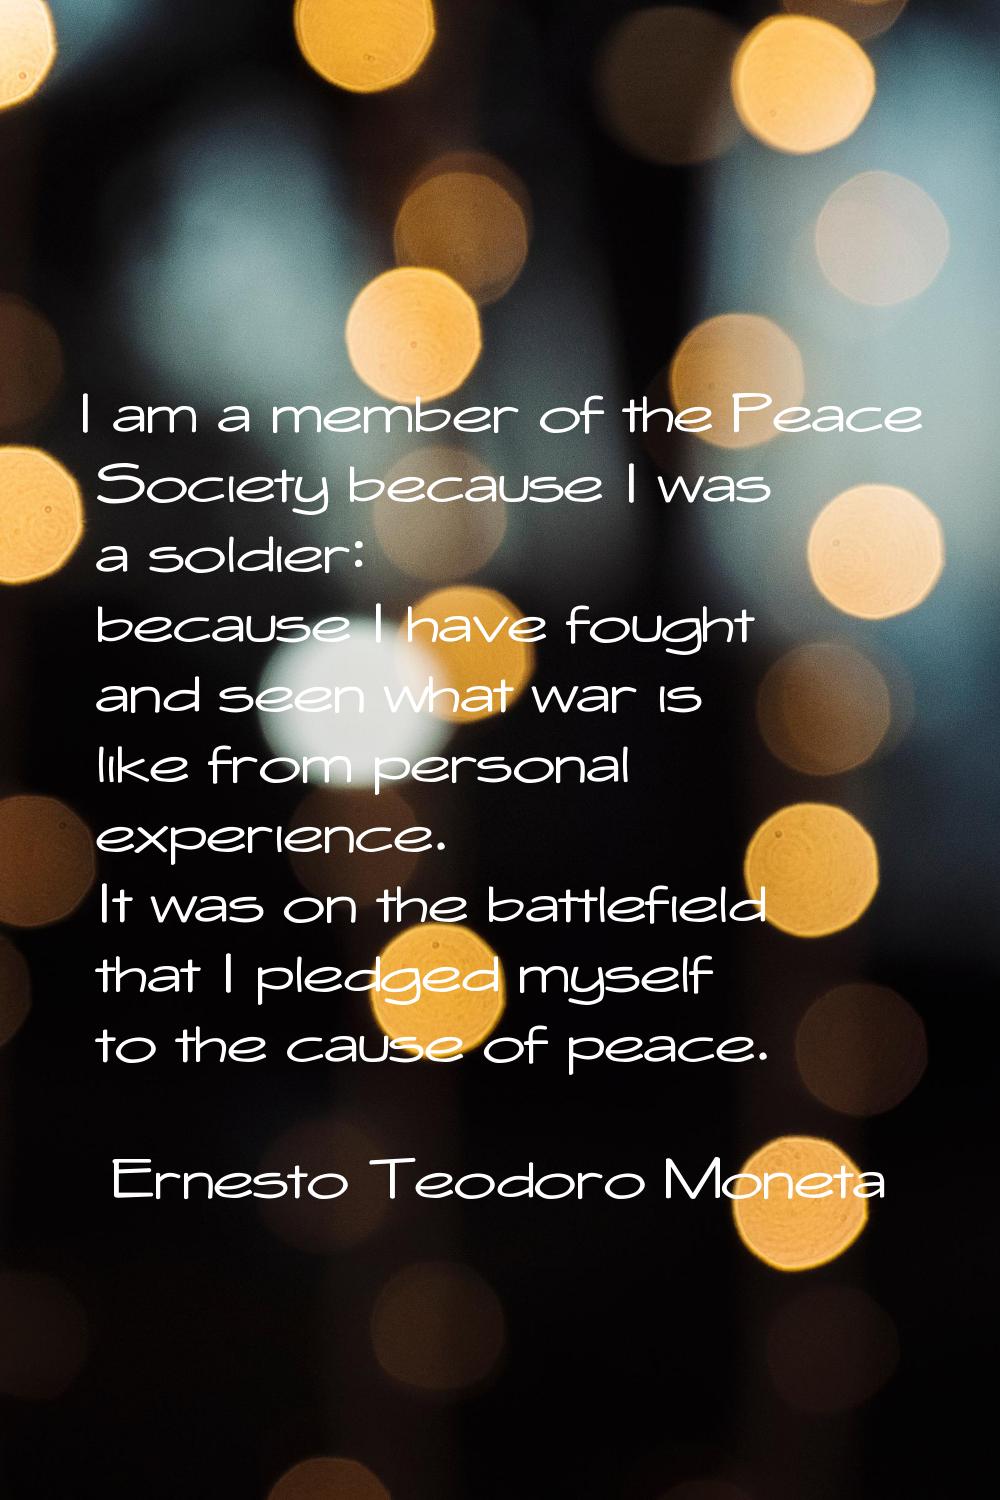 I am a member of the Peace Society because I was a soldier: because I have fought and seen what war